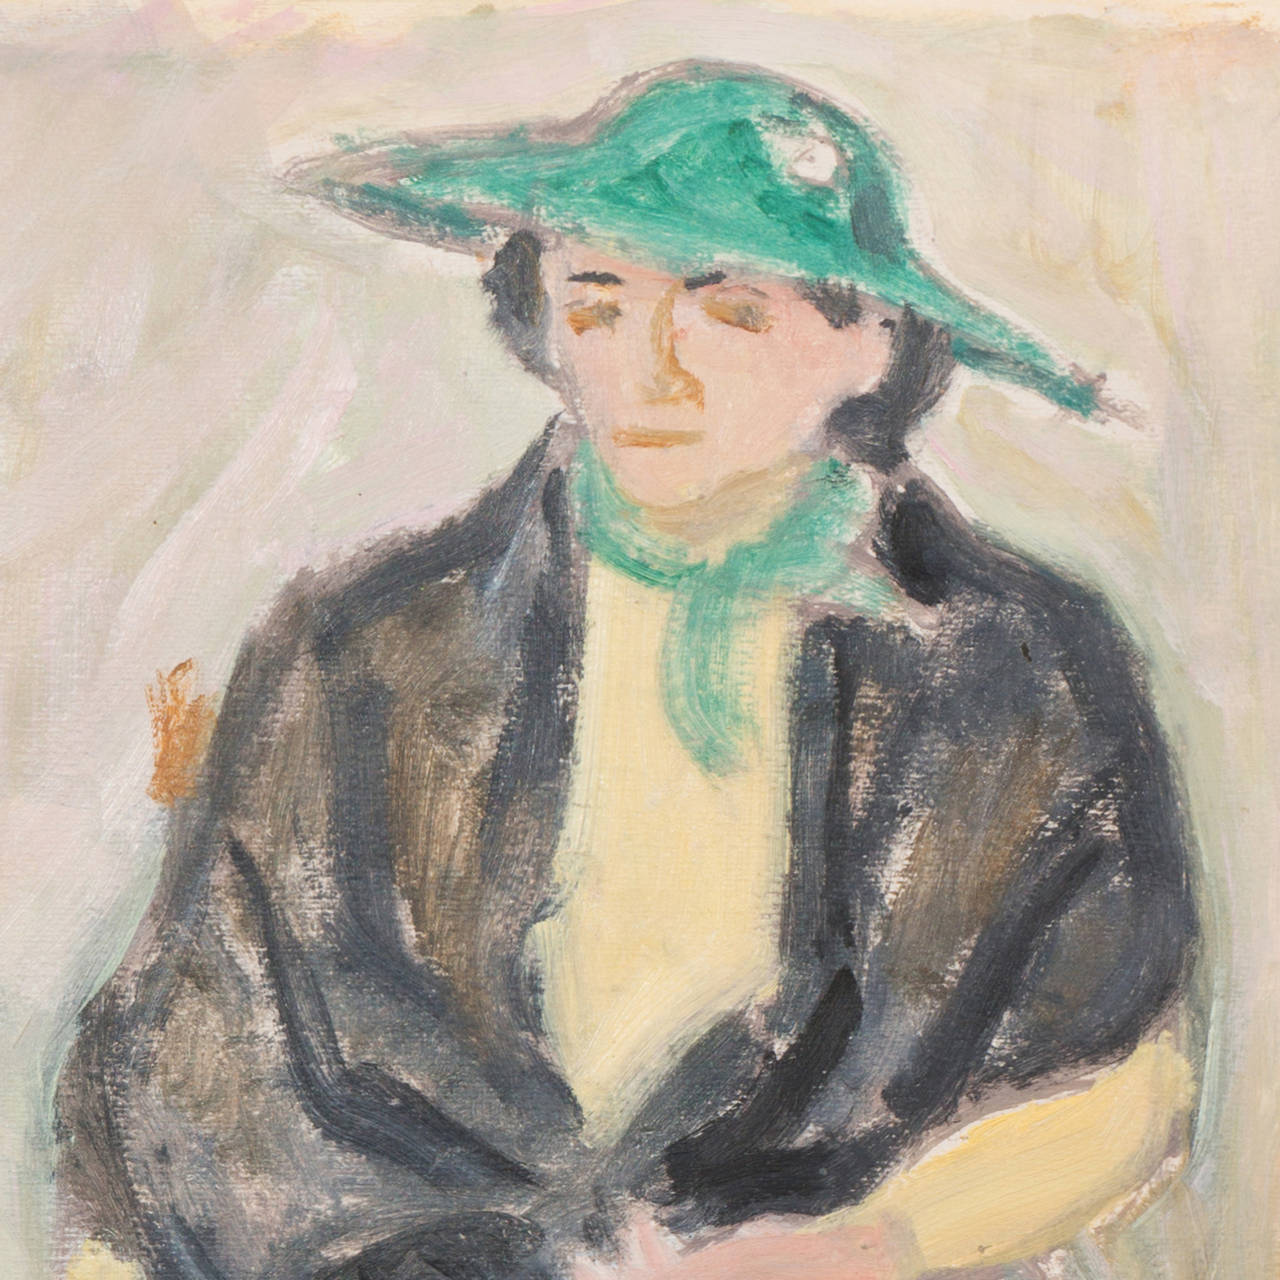 'The Green Hat', Louvre, LACMA, Académie Chaumière, Post-Impressionist, Fashion - Painting by Victor Di Gesu